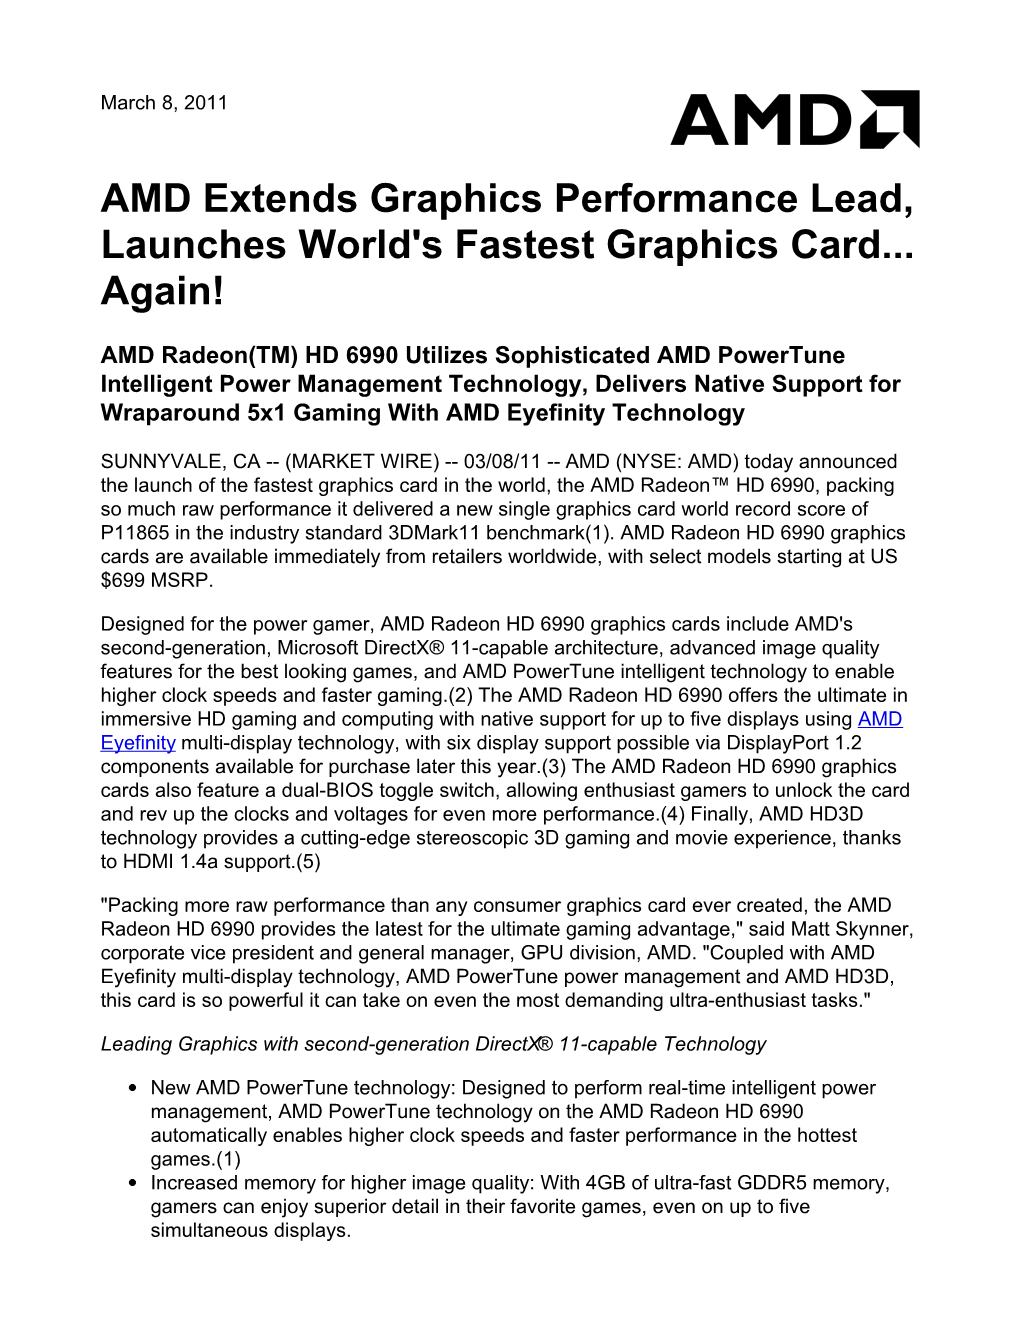 AMD Extends Graphics Performance Lead, Launches World's Fastest Graphics Card... Again!